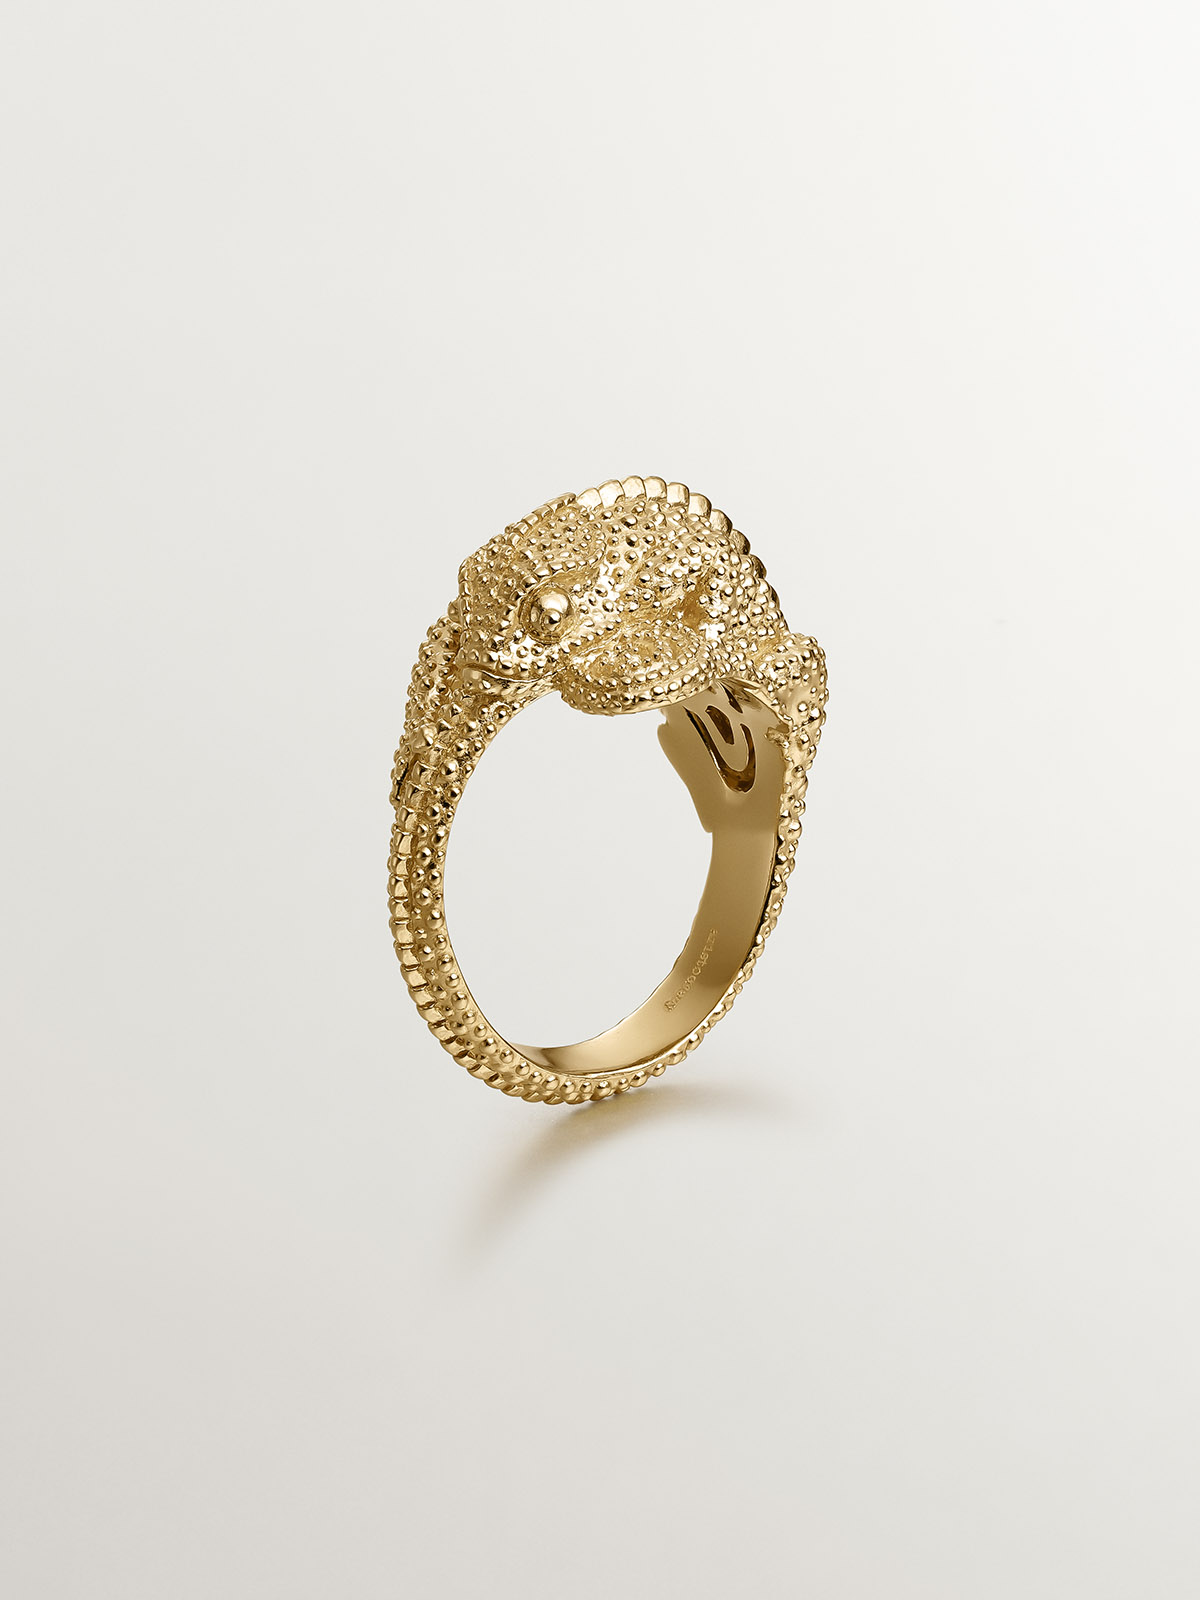 925 silver ring bathed in 18k yellow gold with small chameleon